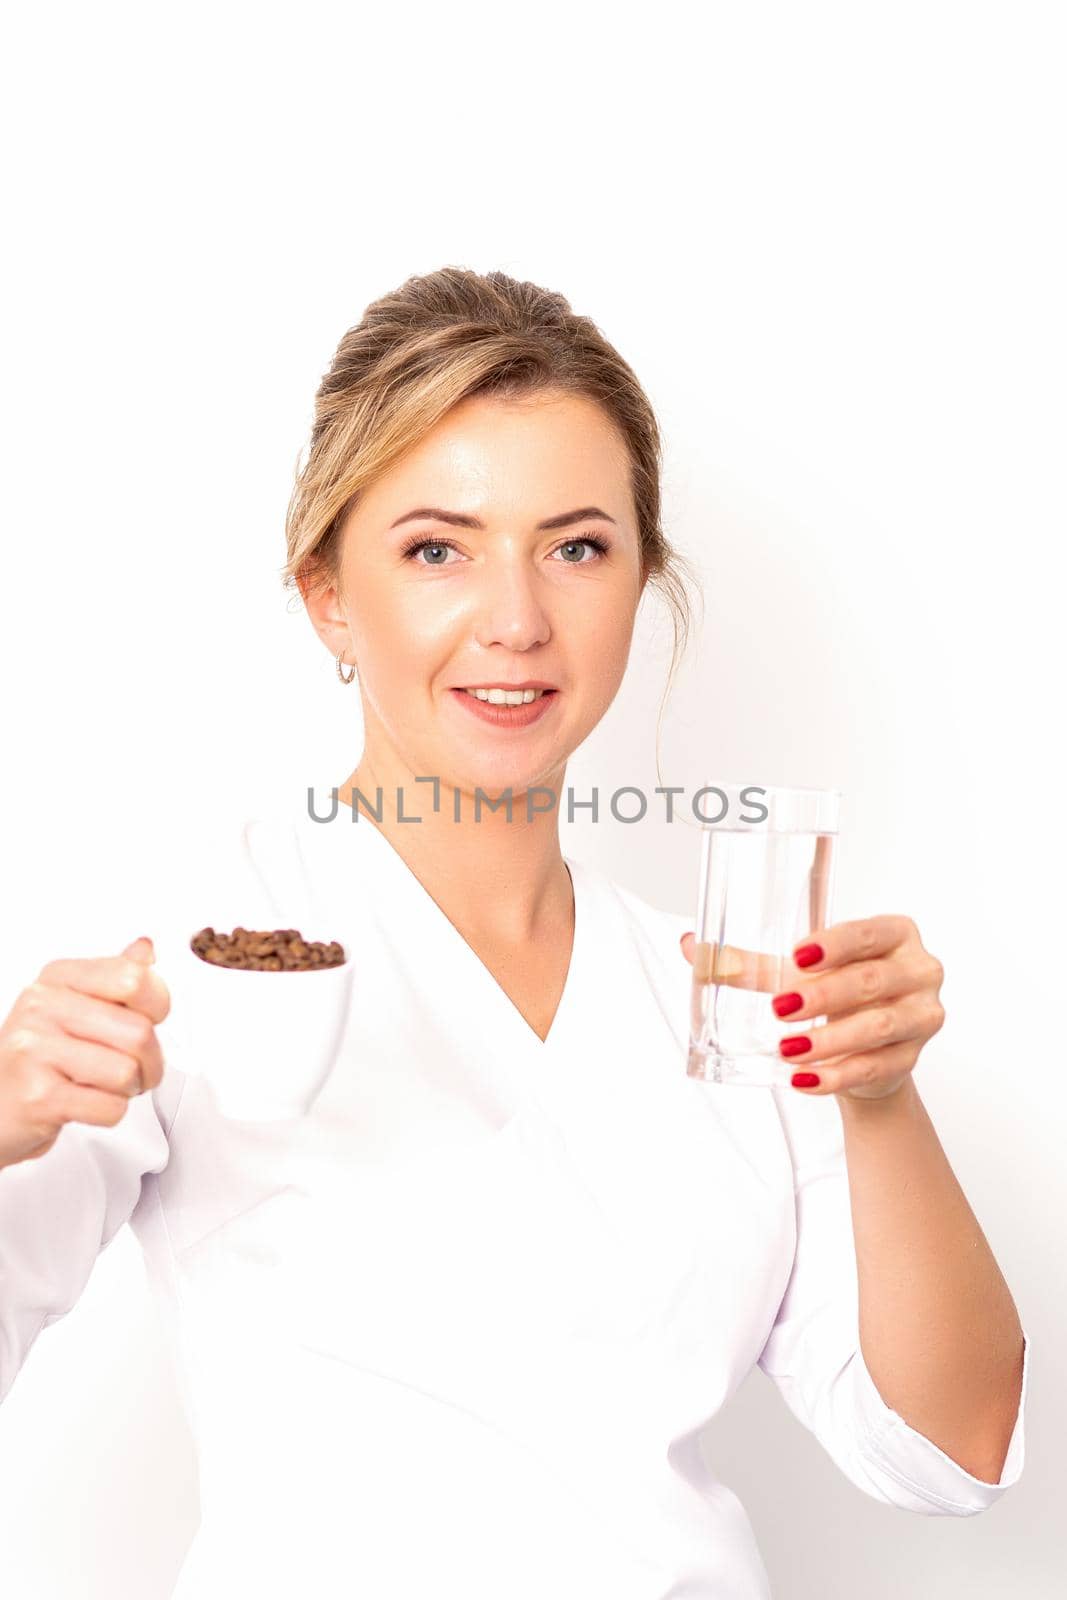 Coffee with water. The female nutritionist holds a cup of coffee beans and a glass of water in her hands on white background